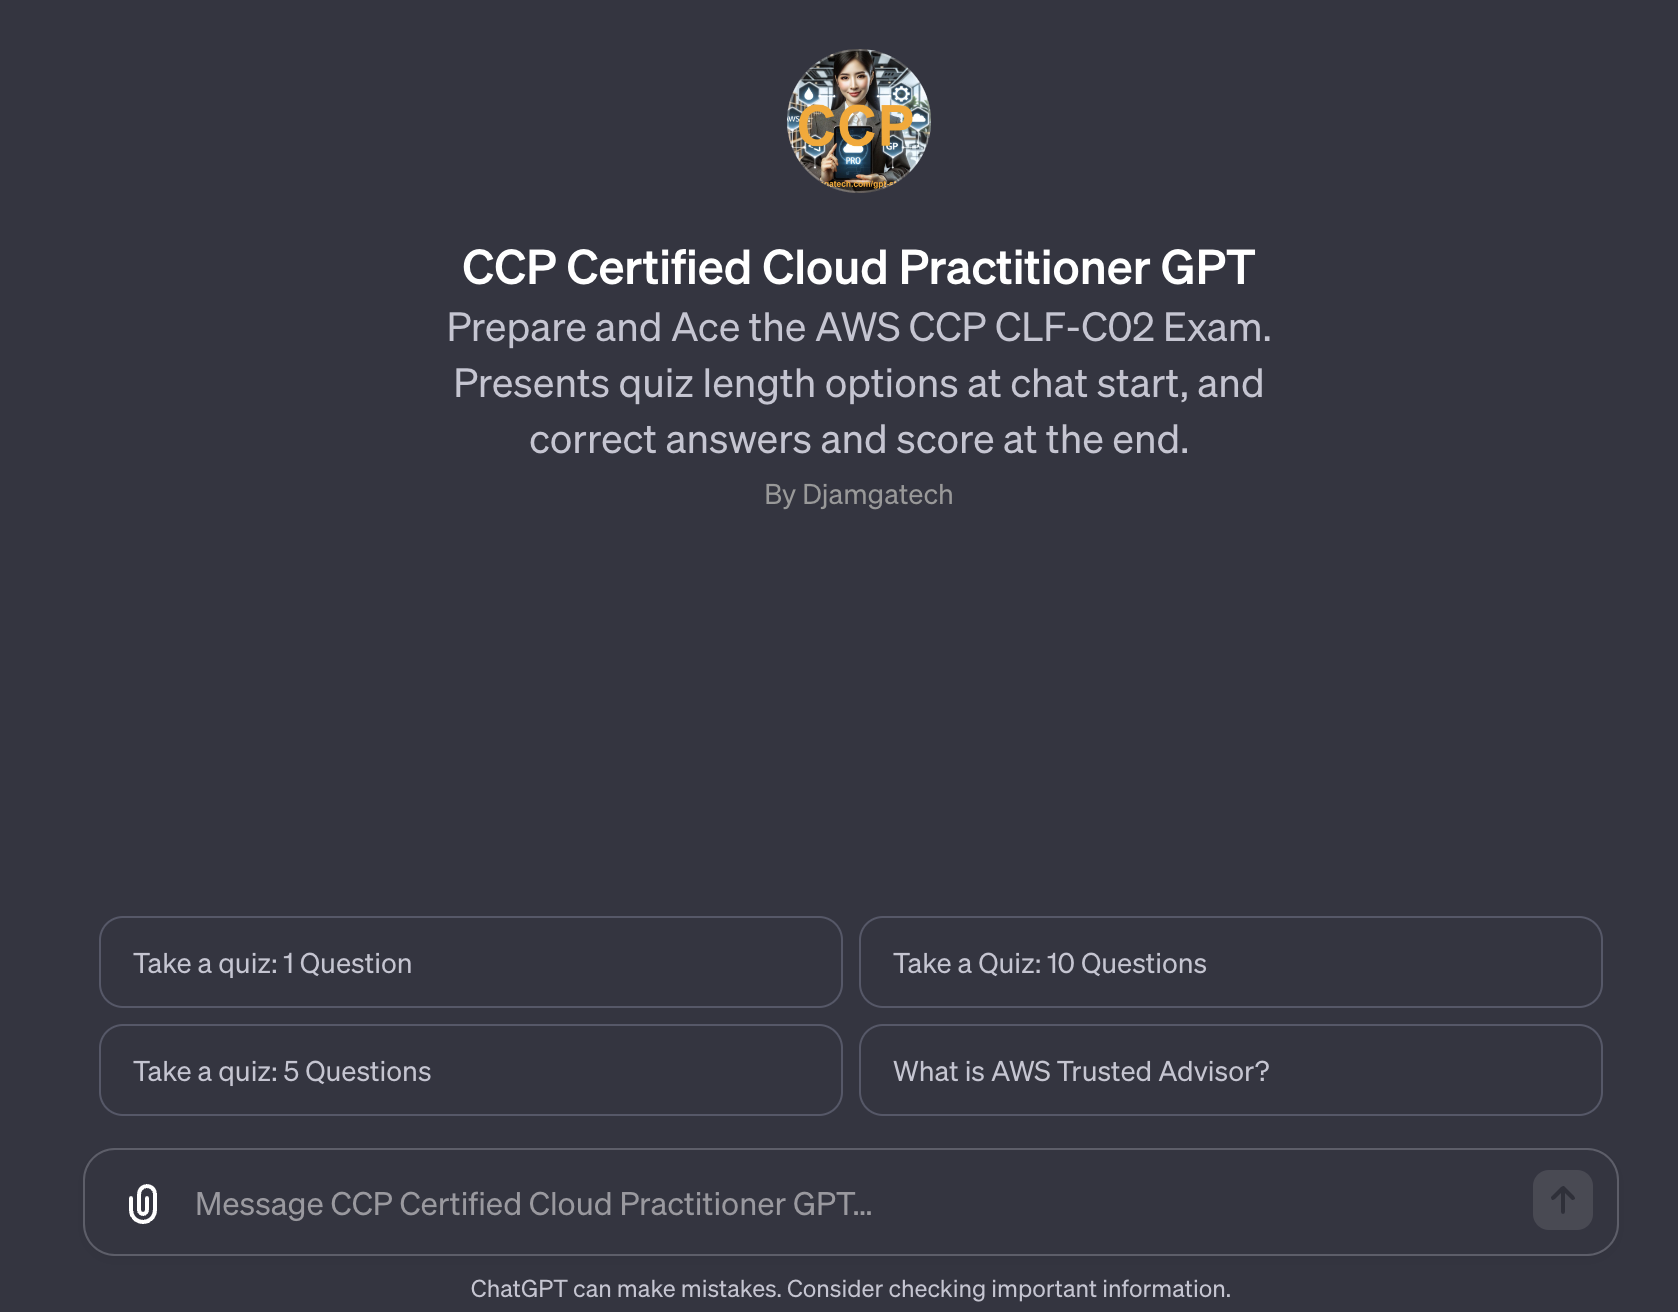 Ace the AWS Cloud Practitioner Certification CCP CLF-C02 Exam with GPT: Prepare and Ace the AWS Cloud Practitioner Certification CCP CLF-C02: FREE AWS CCP EXAM PREP GPT